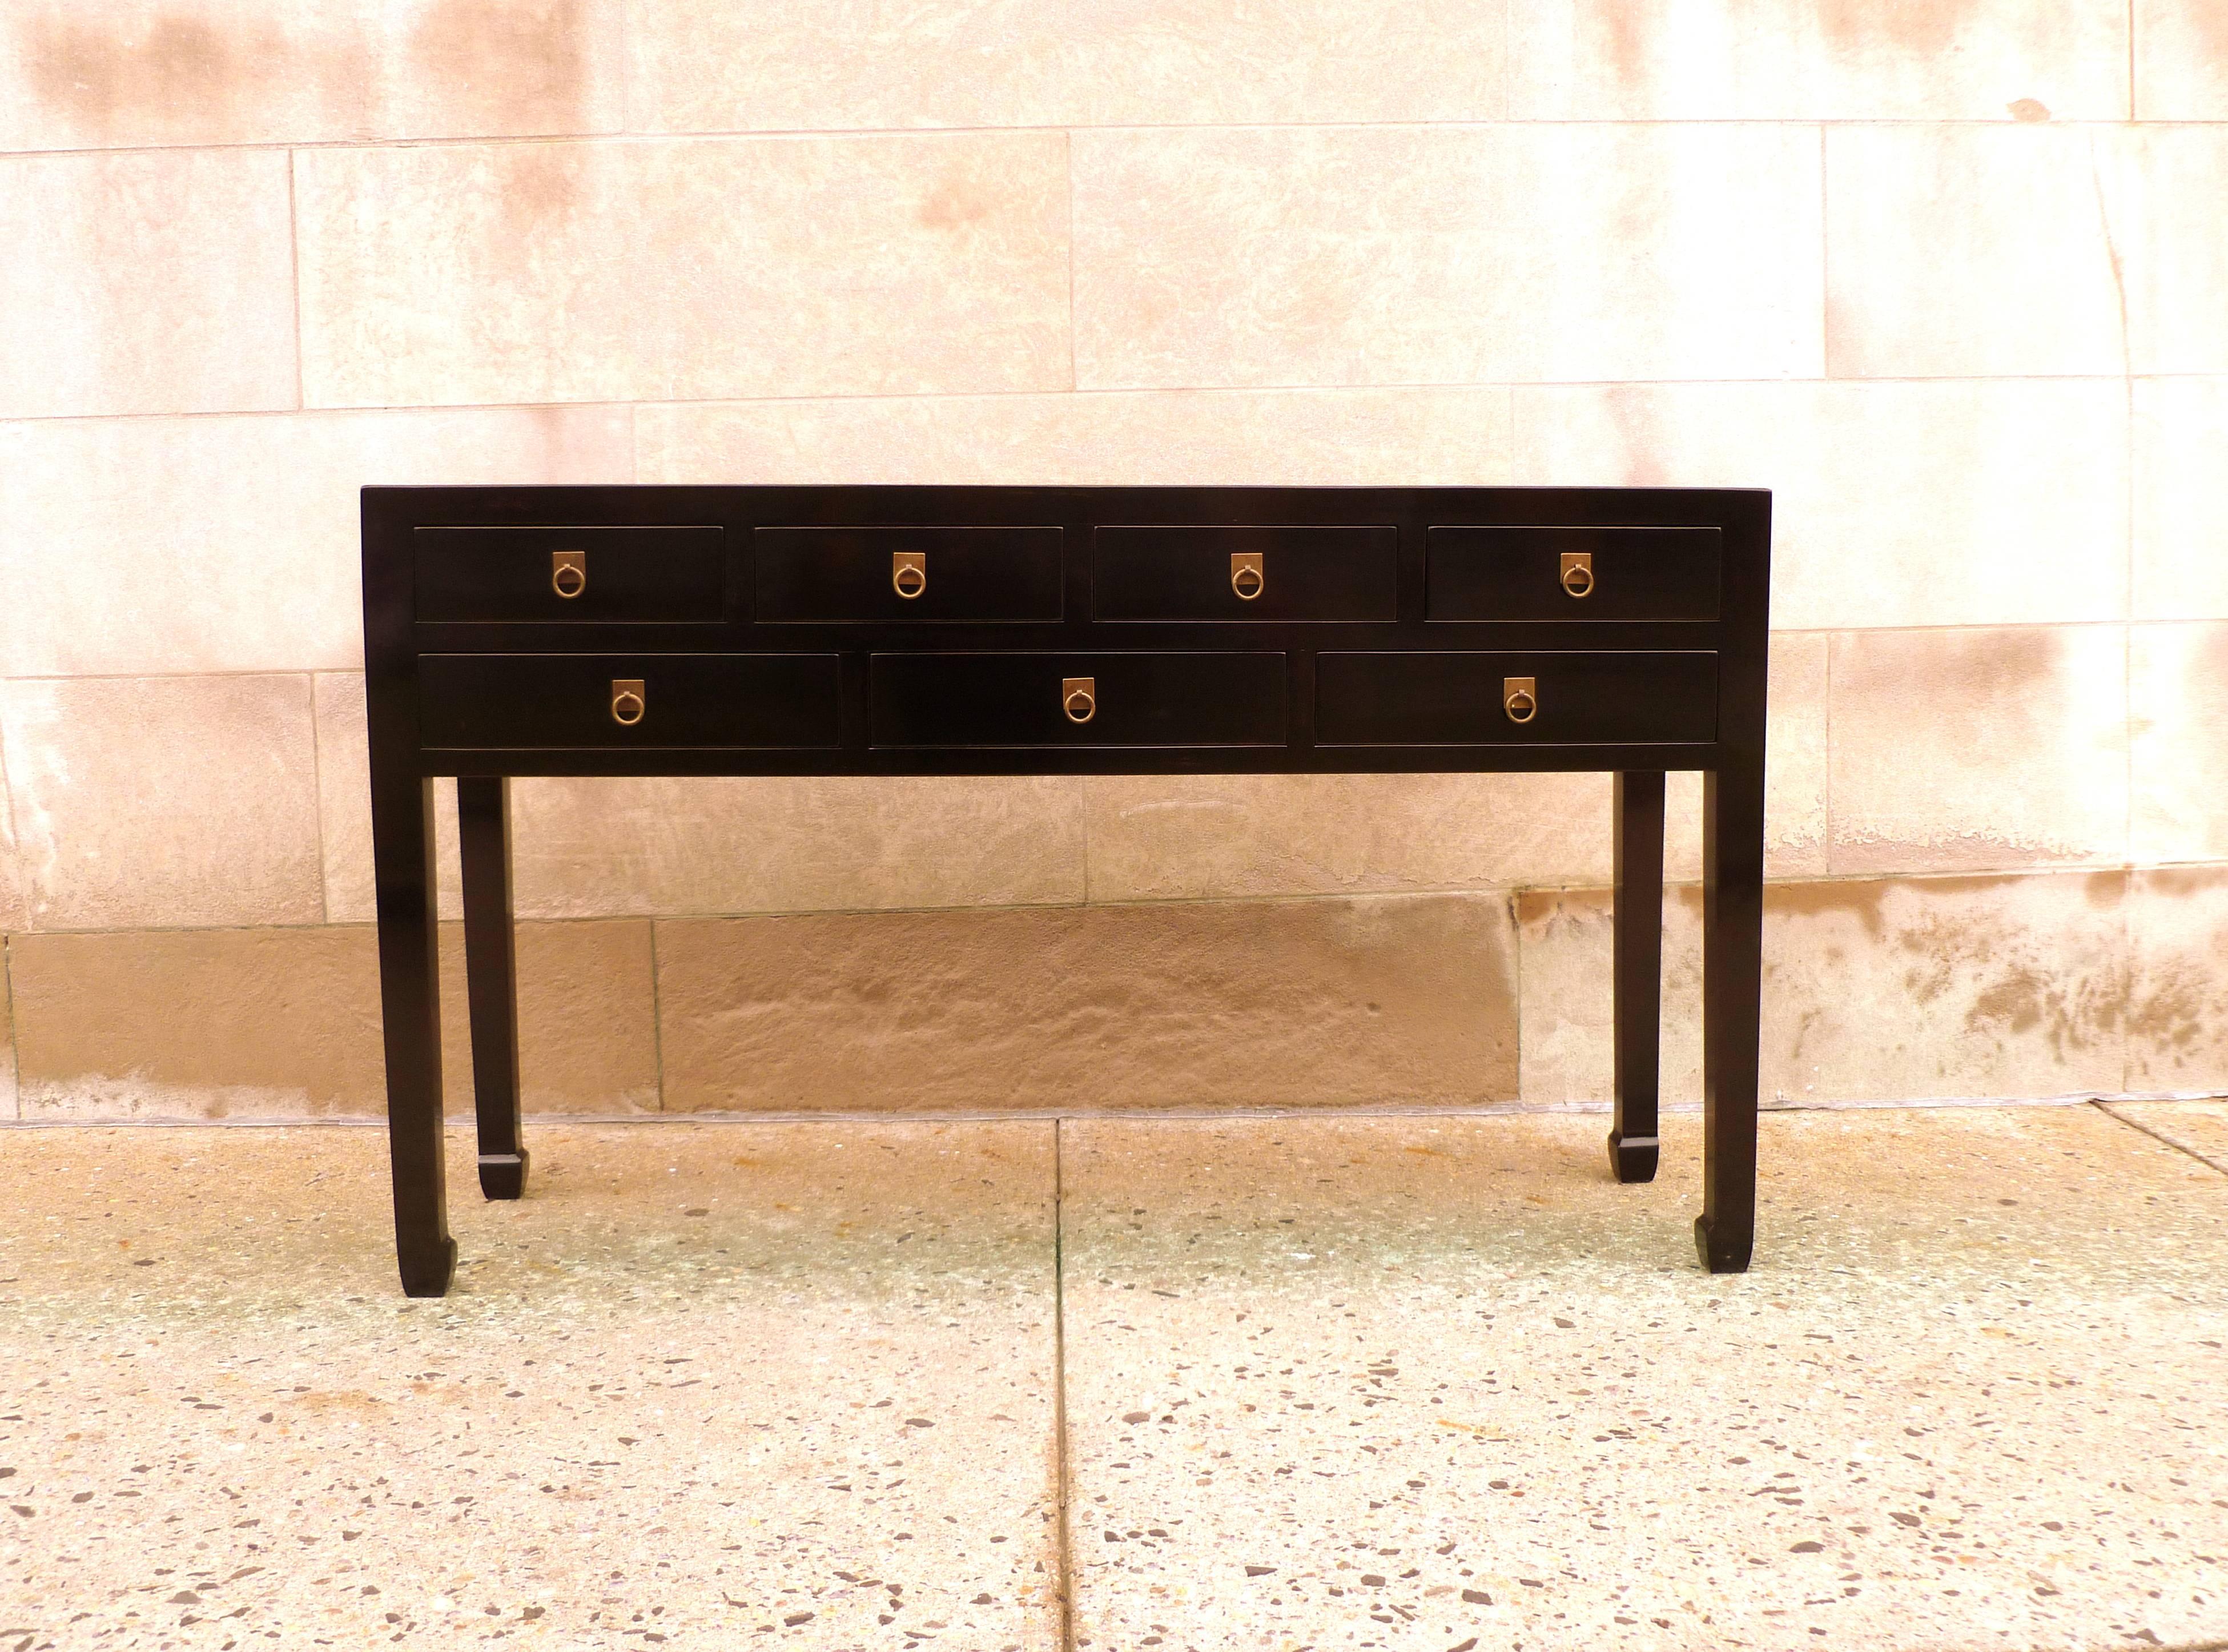 A simple and elegant black lacquer console table with seven drawers and brass ring pulls, beautiful color, form and lines. We carry fine quality furniture with elegant finished and has been appeared many times in 